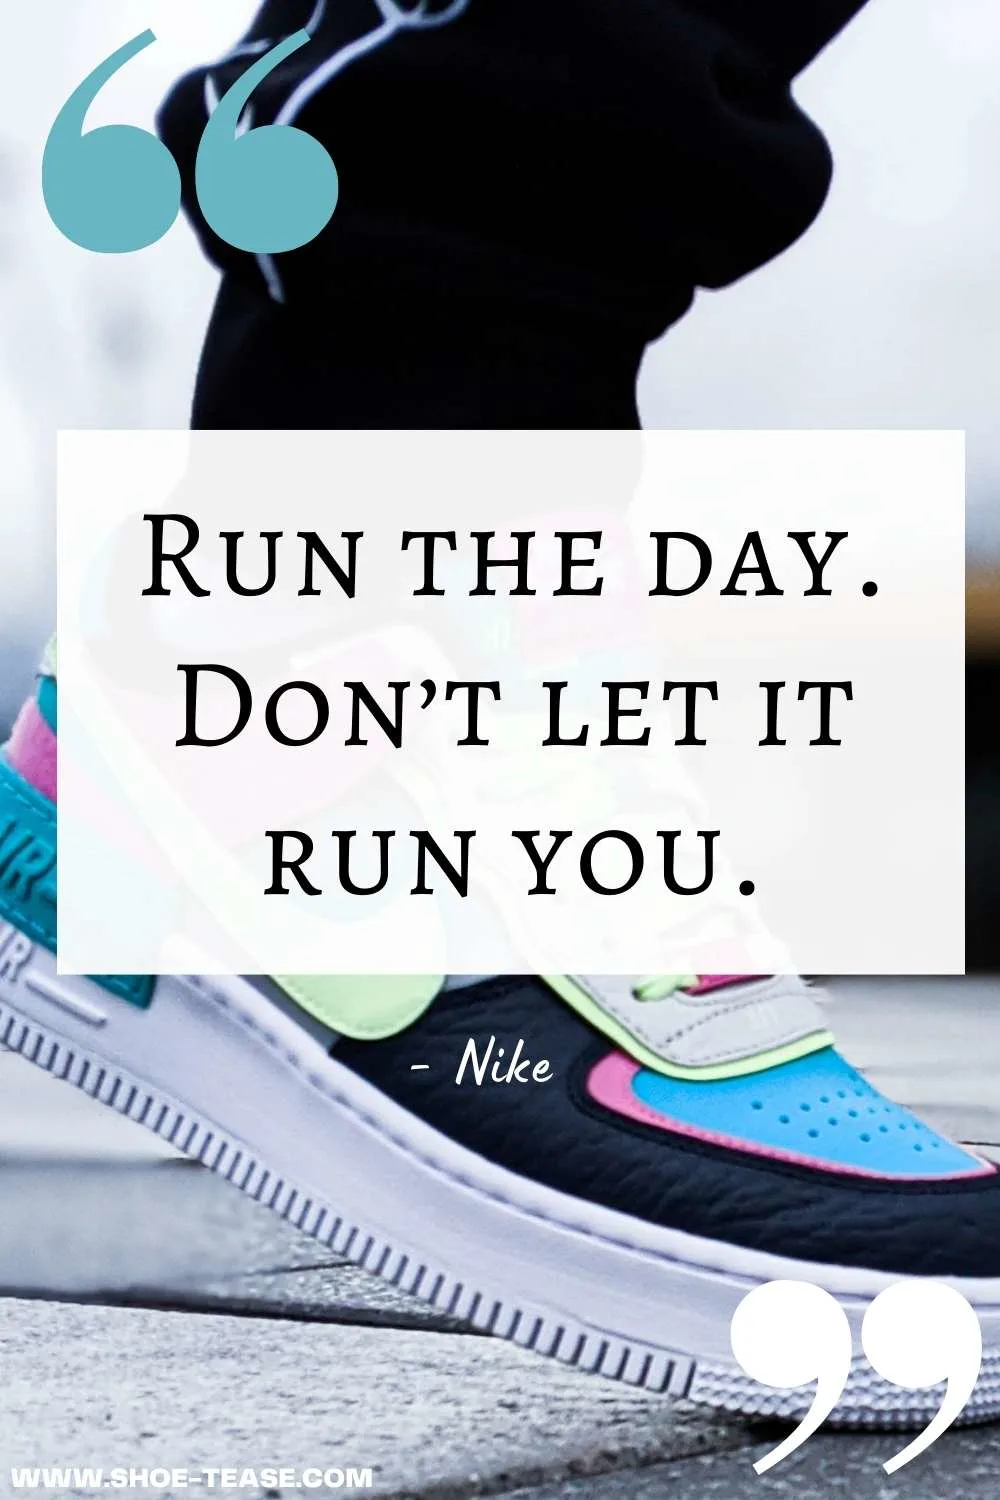 nike quotes and sayings